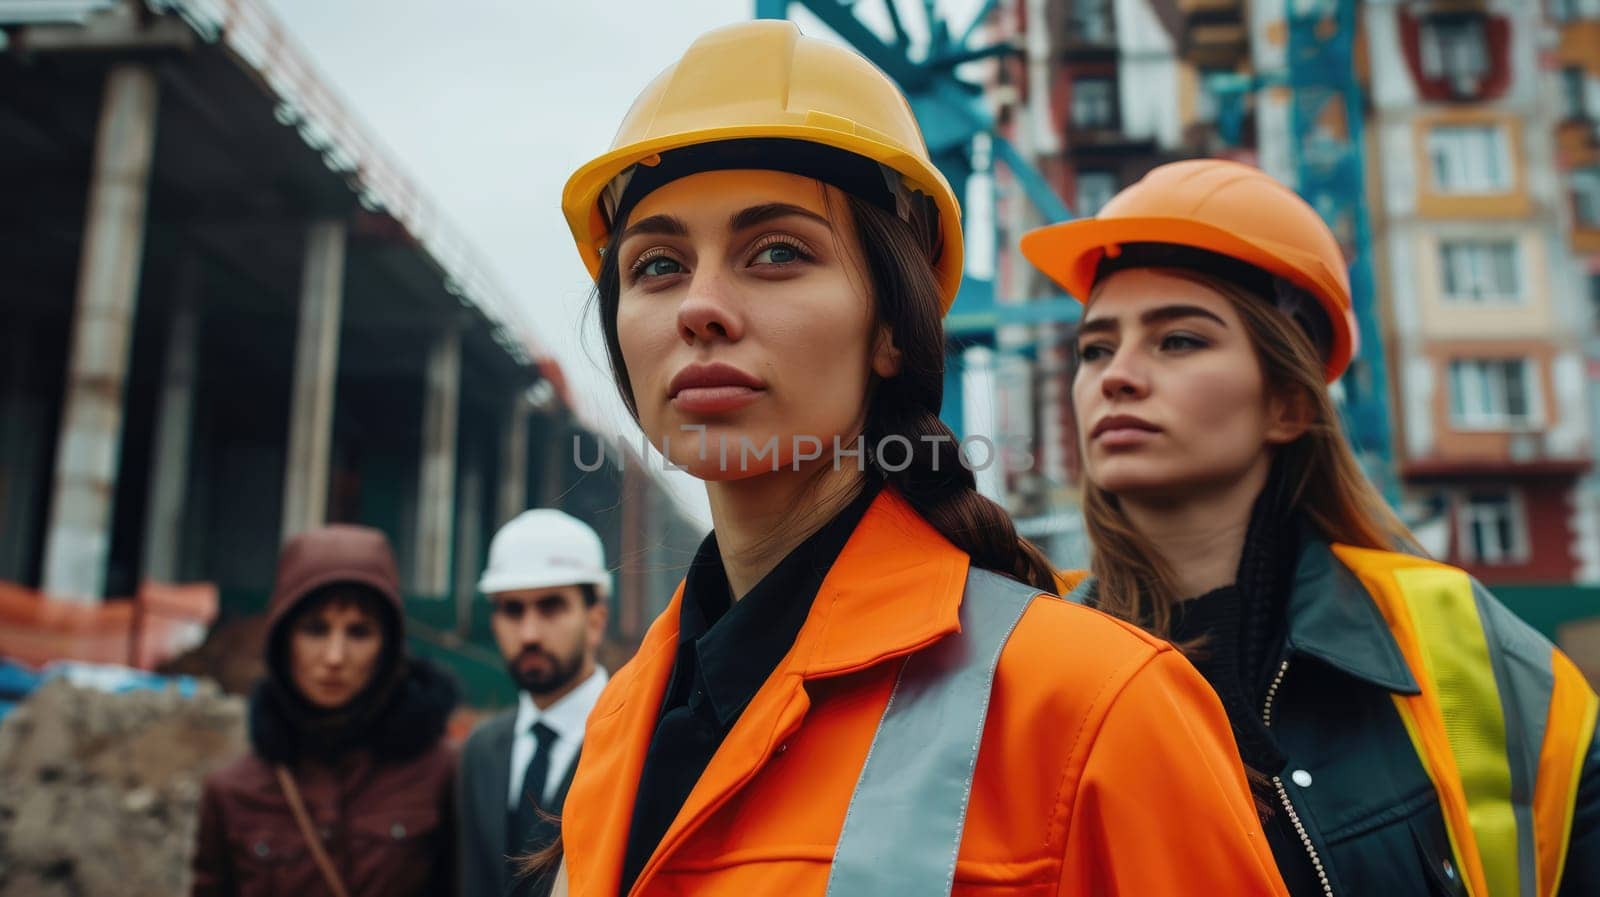 Construction concept of Engineer or Architect working. A woman foreman by natali_brill